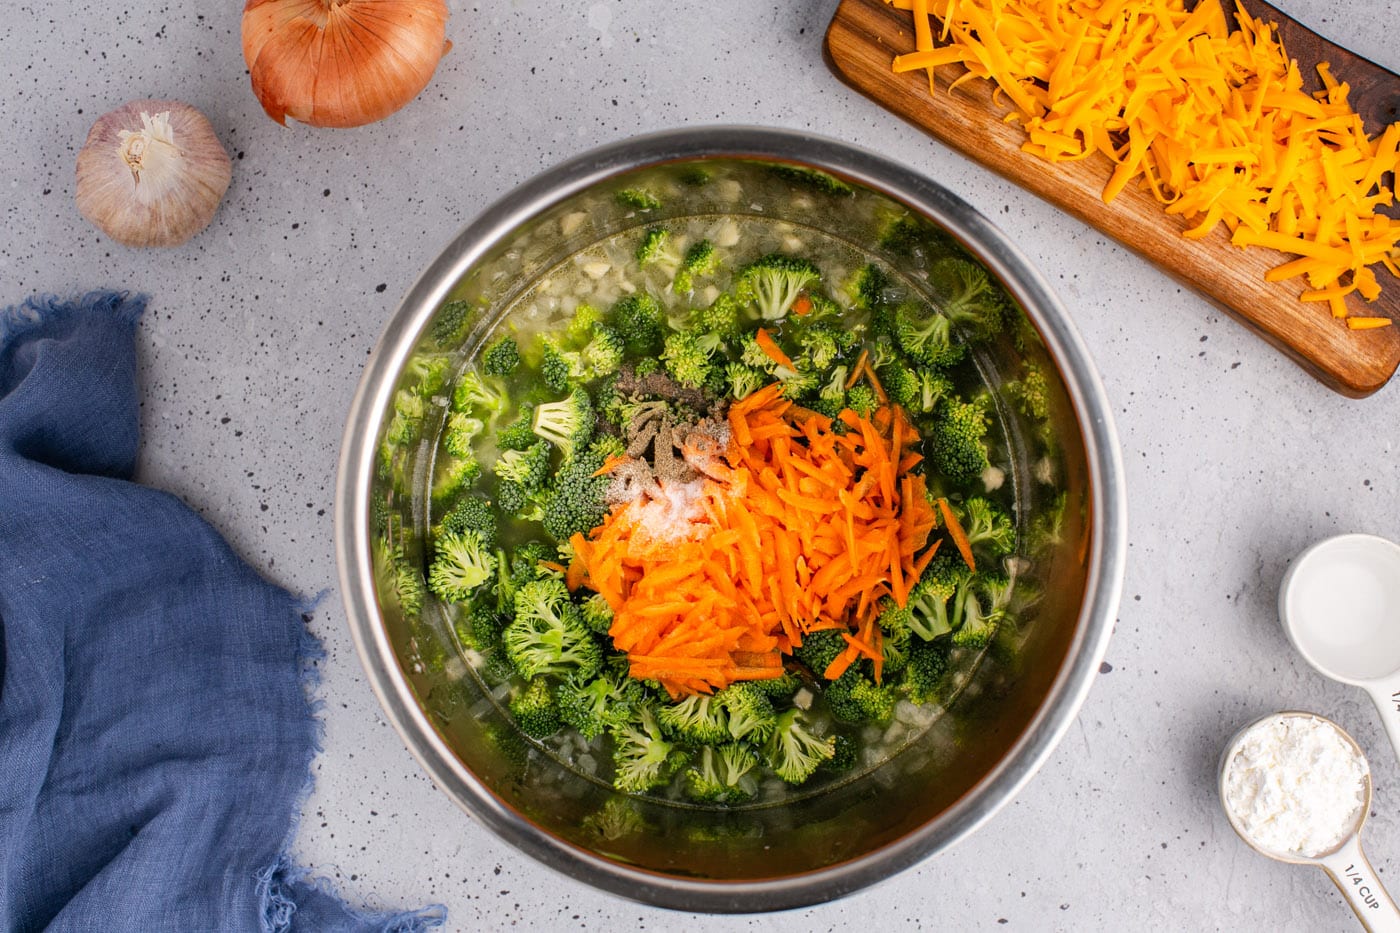 broccoli, shredded carrots, and seasonings added to butter mixture in an instant pot